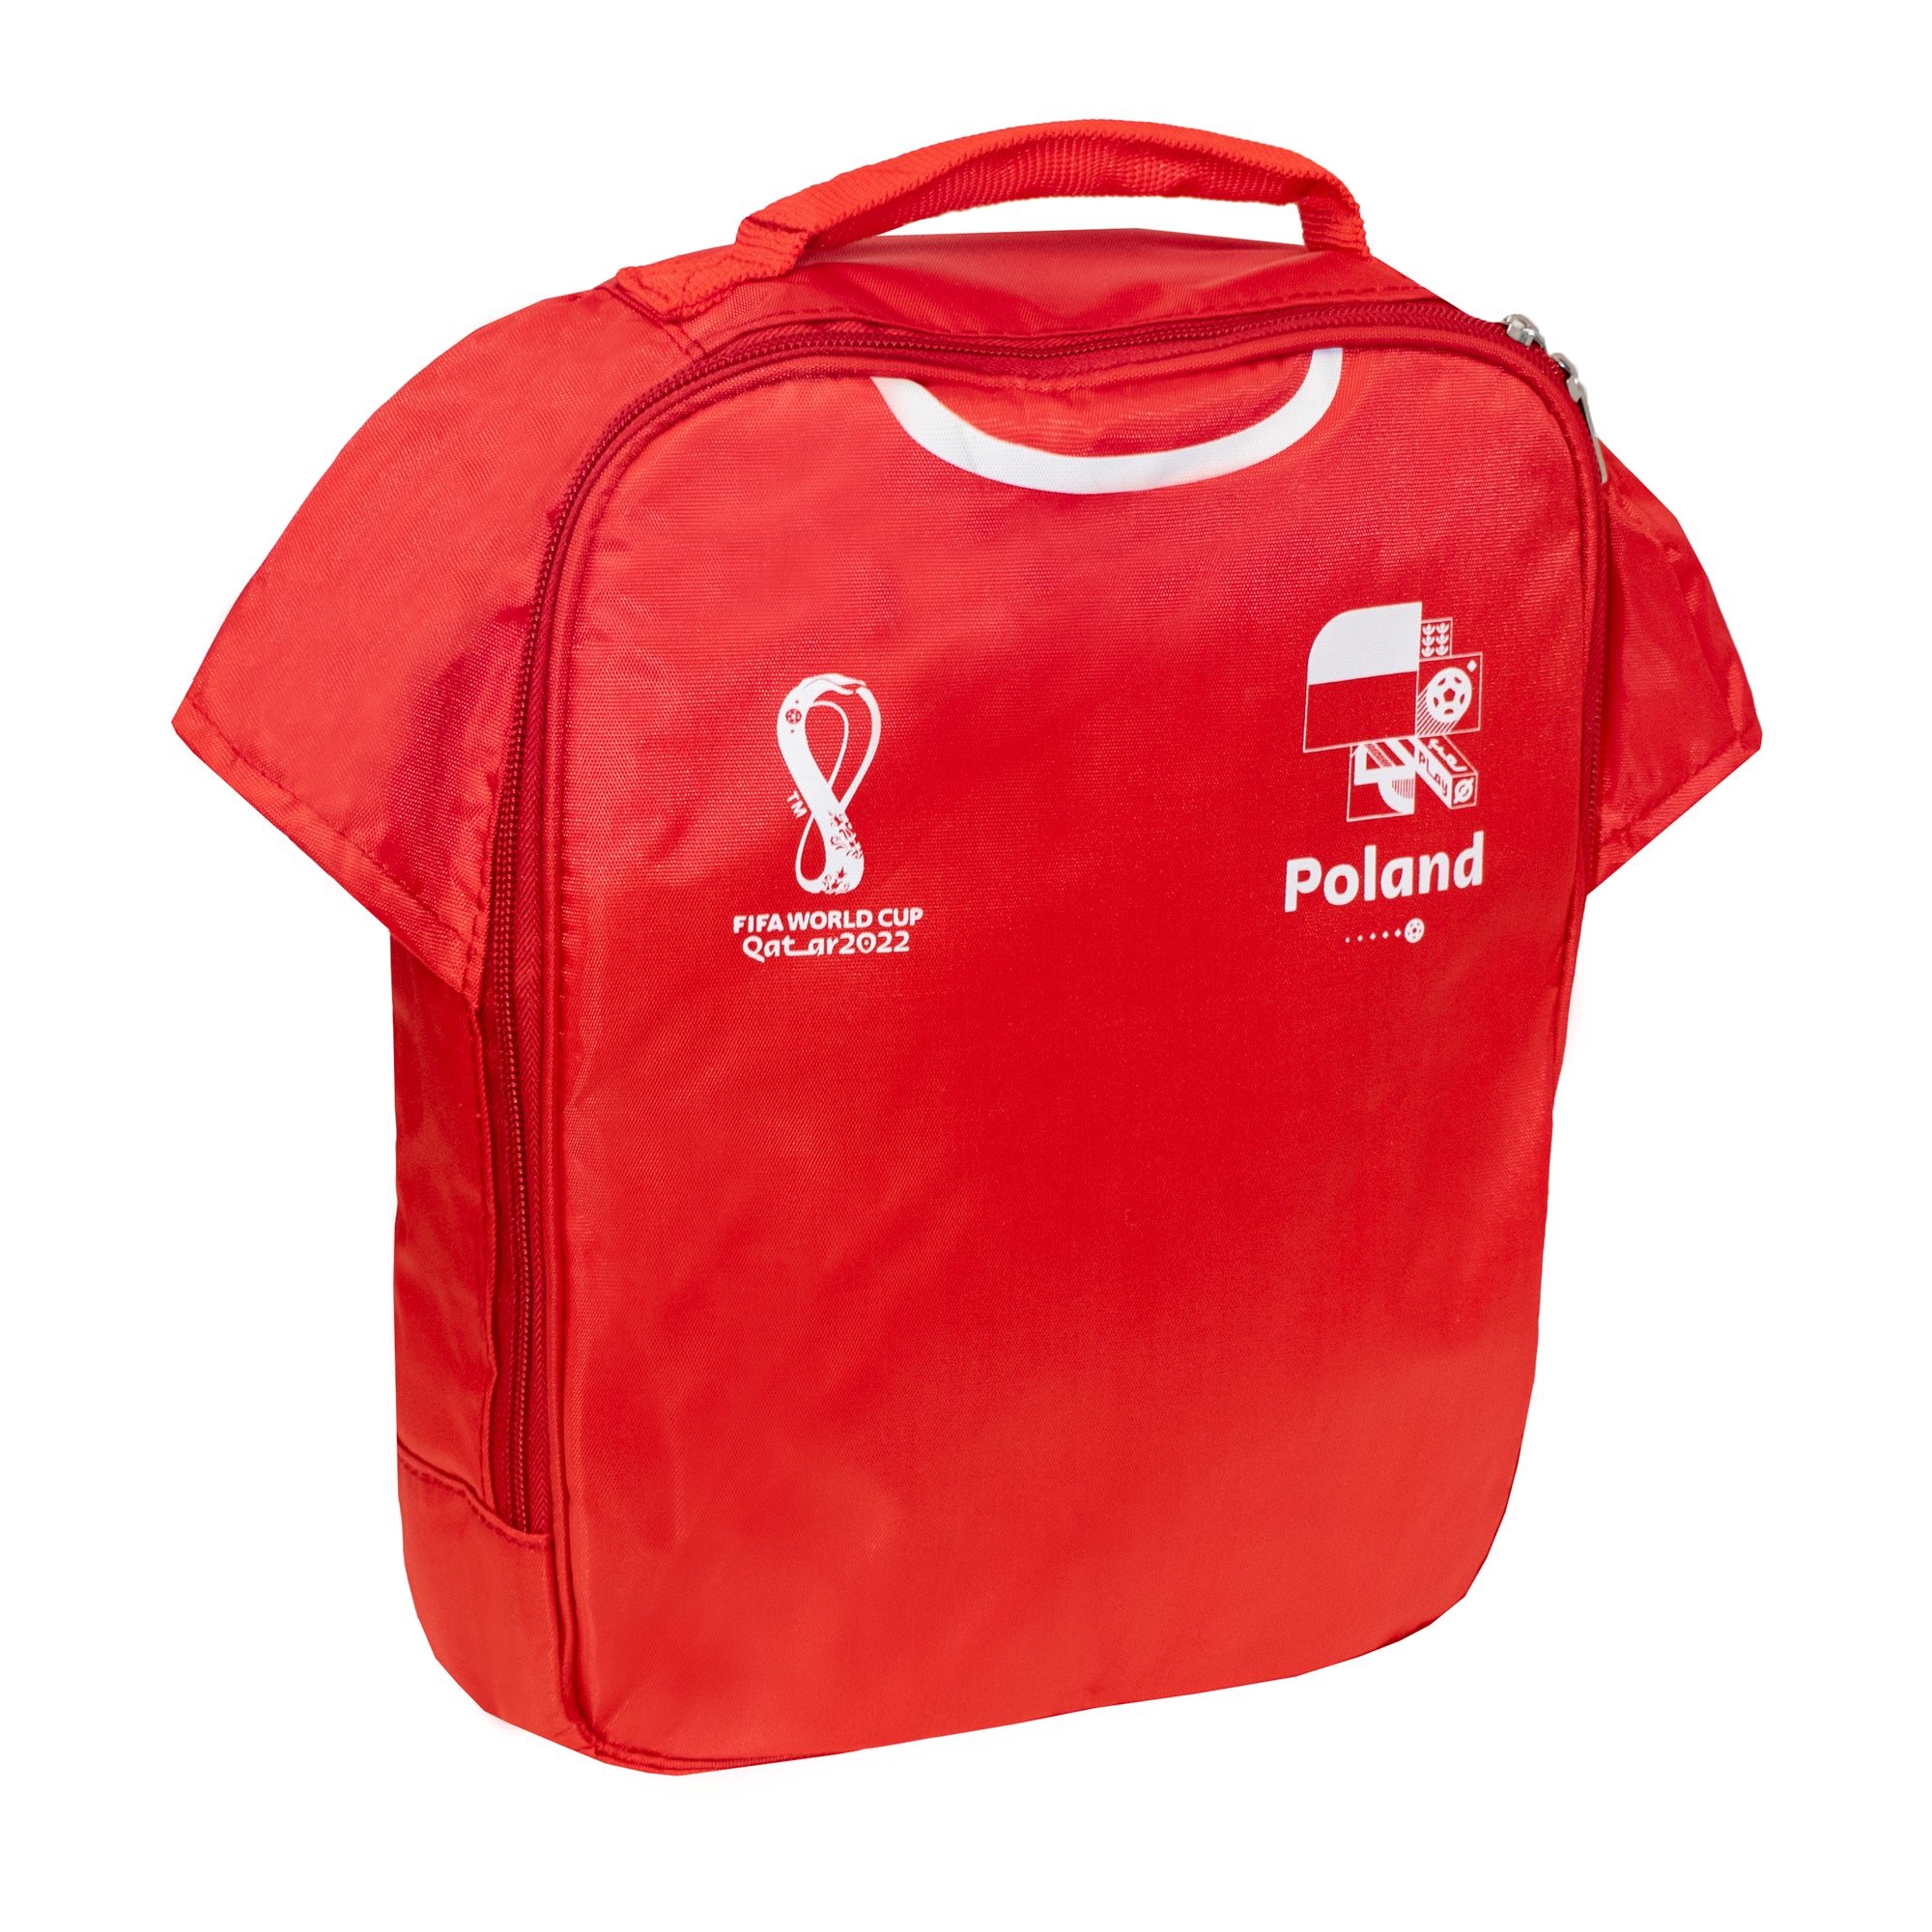 POLAND – FIFA WORLD CUP 2022 LUNCH BAG/COOLER